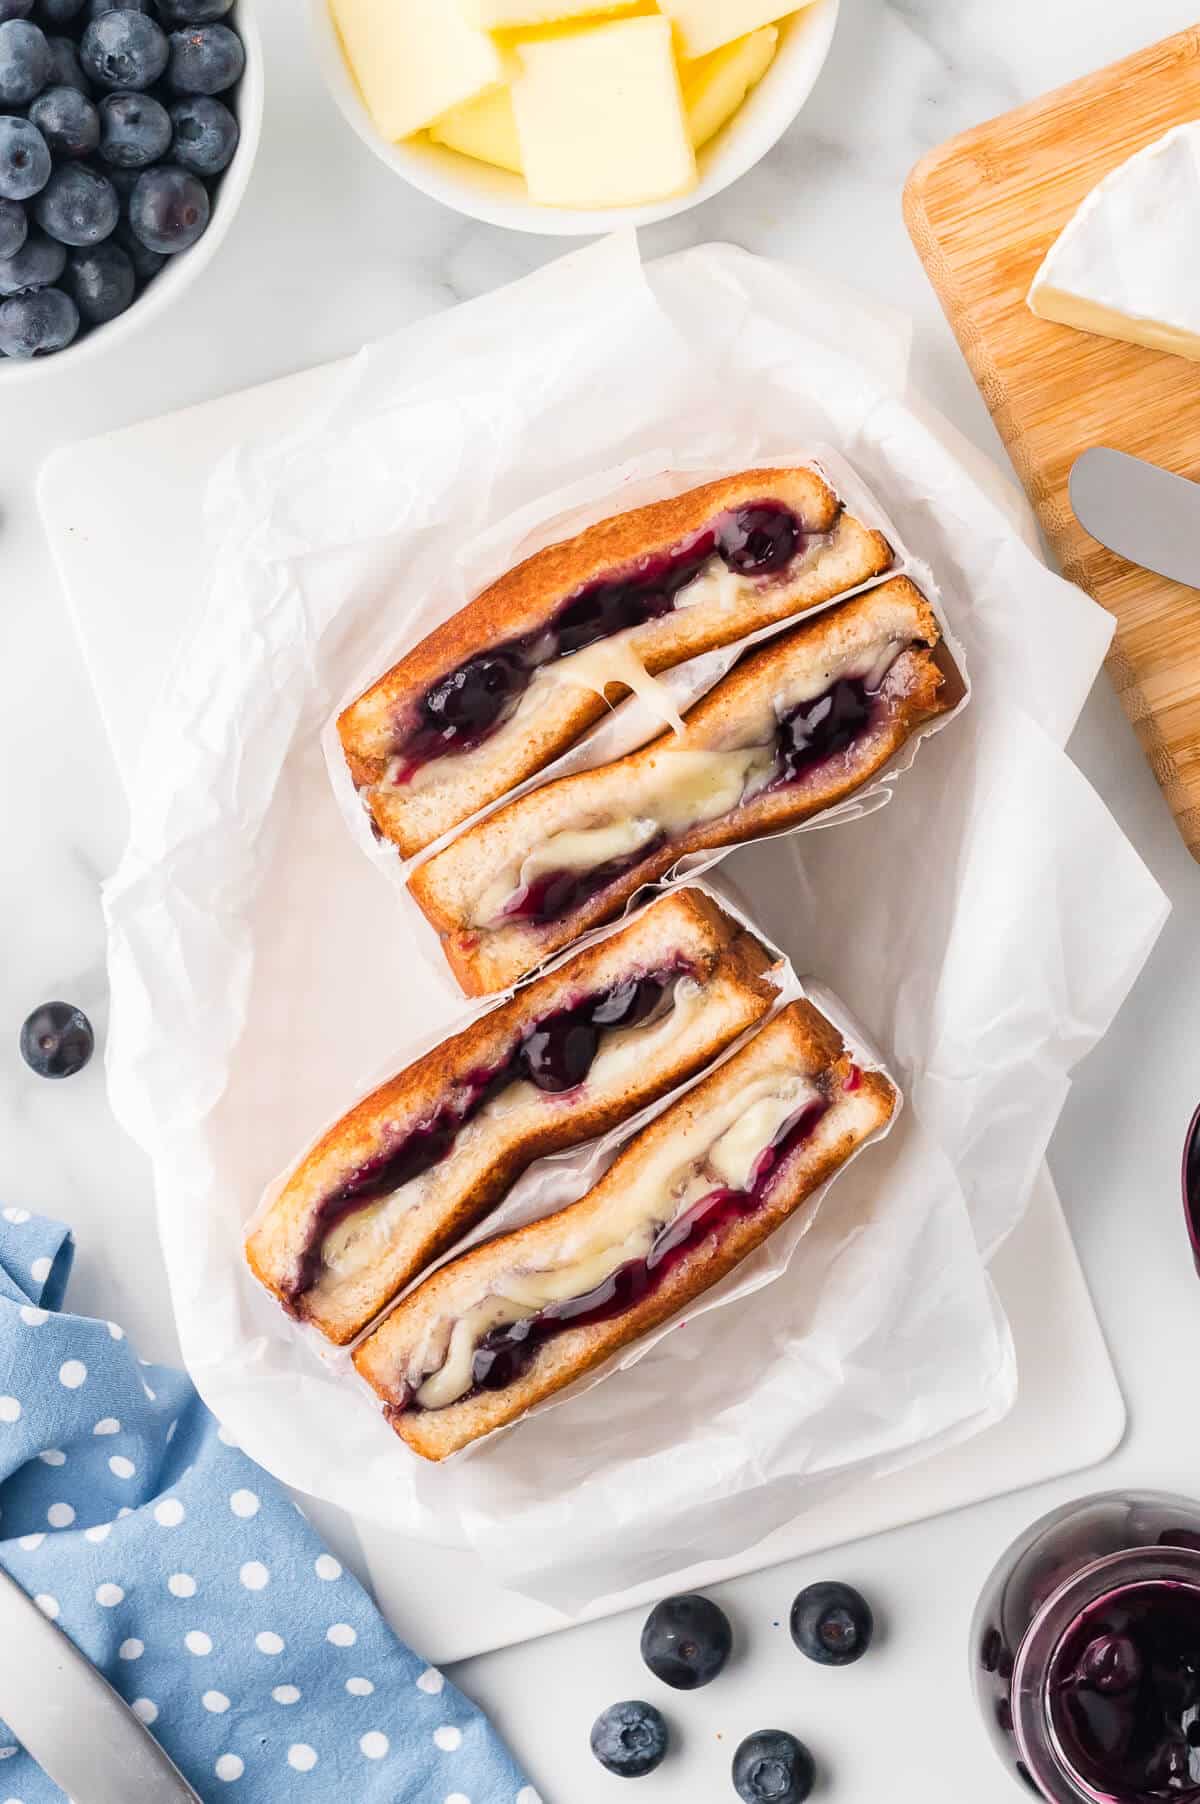 A blueberry brie grilled cheese in parchment paper.